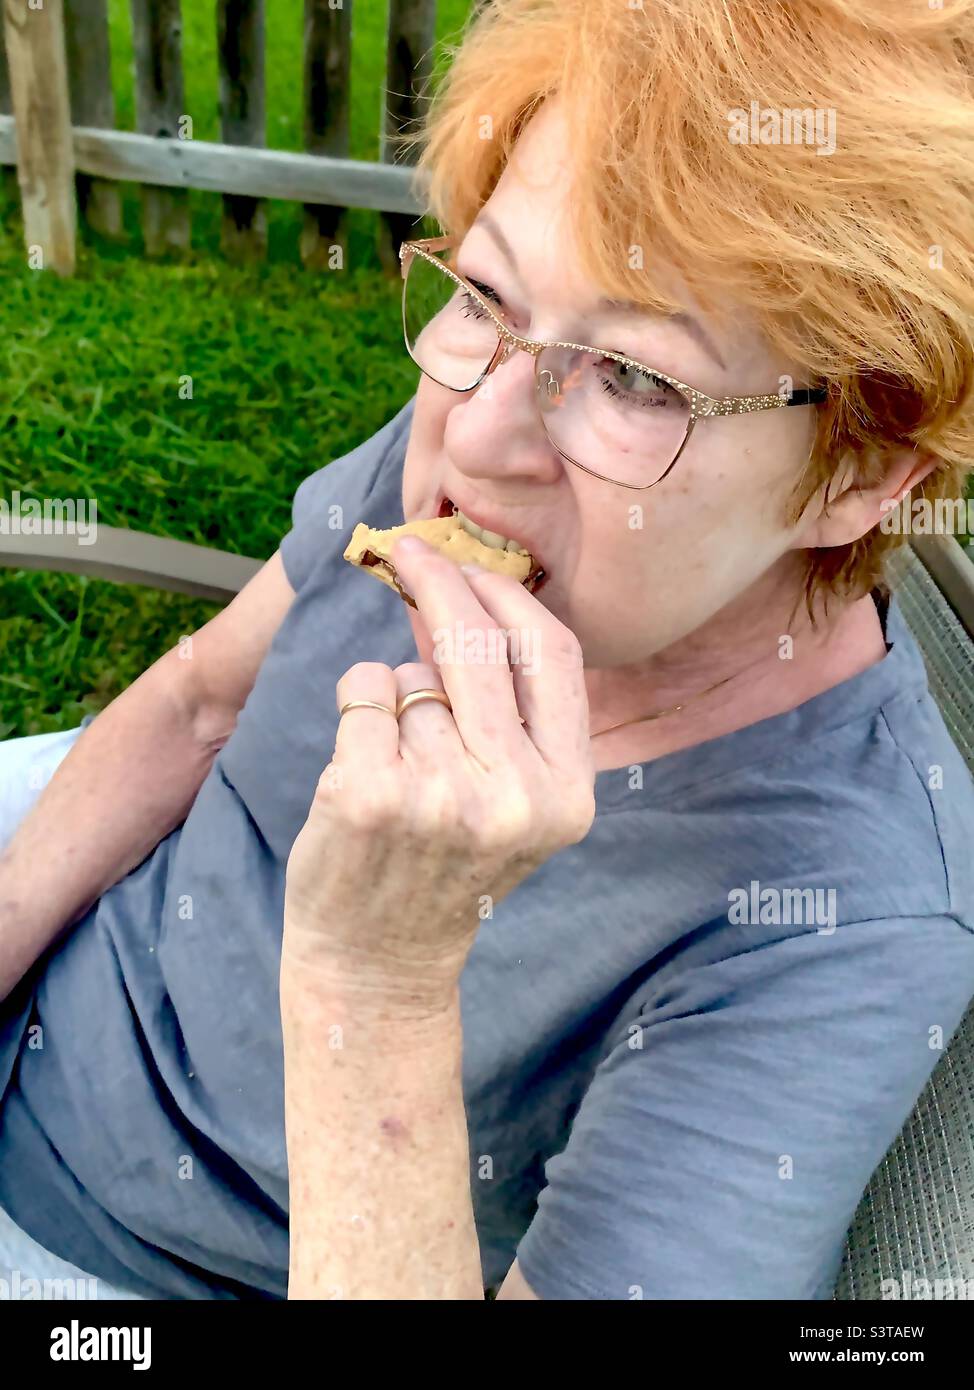 Mature woman eating S’mores Stock Photo